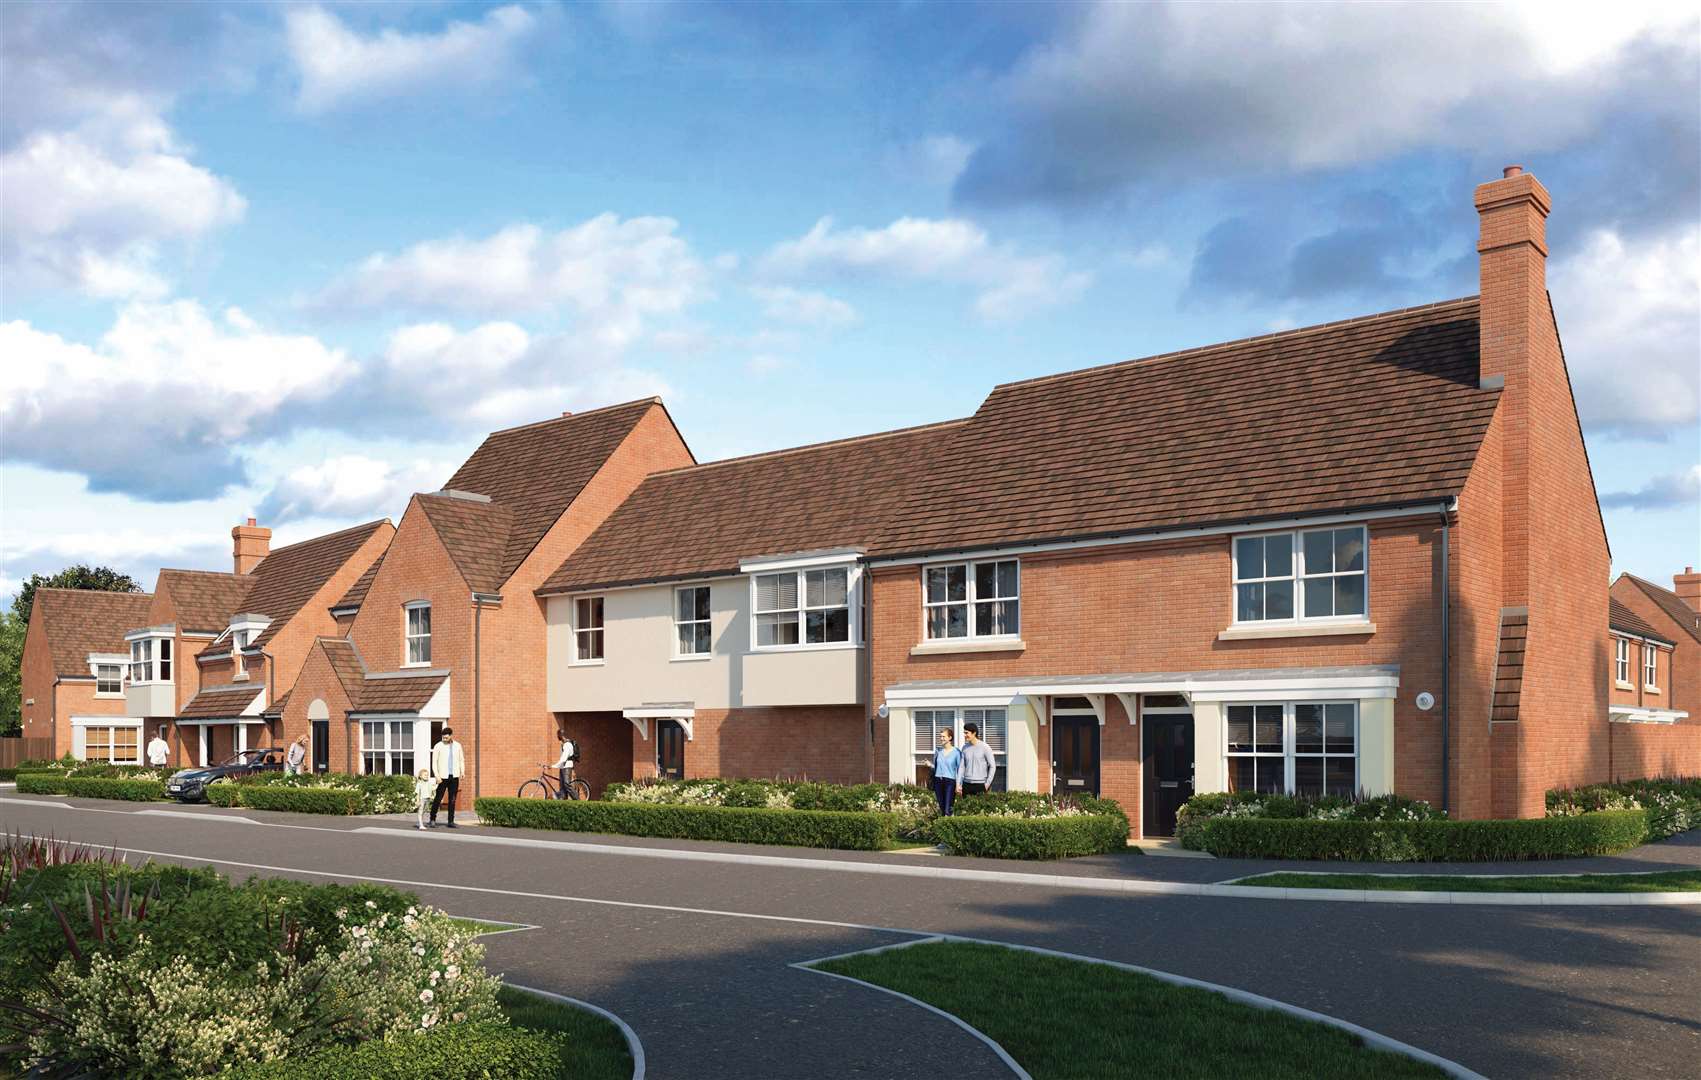 The company is already building 70 homes at Lysander Fields